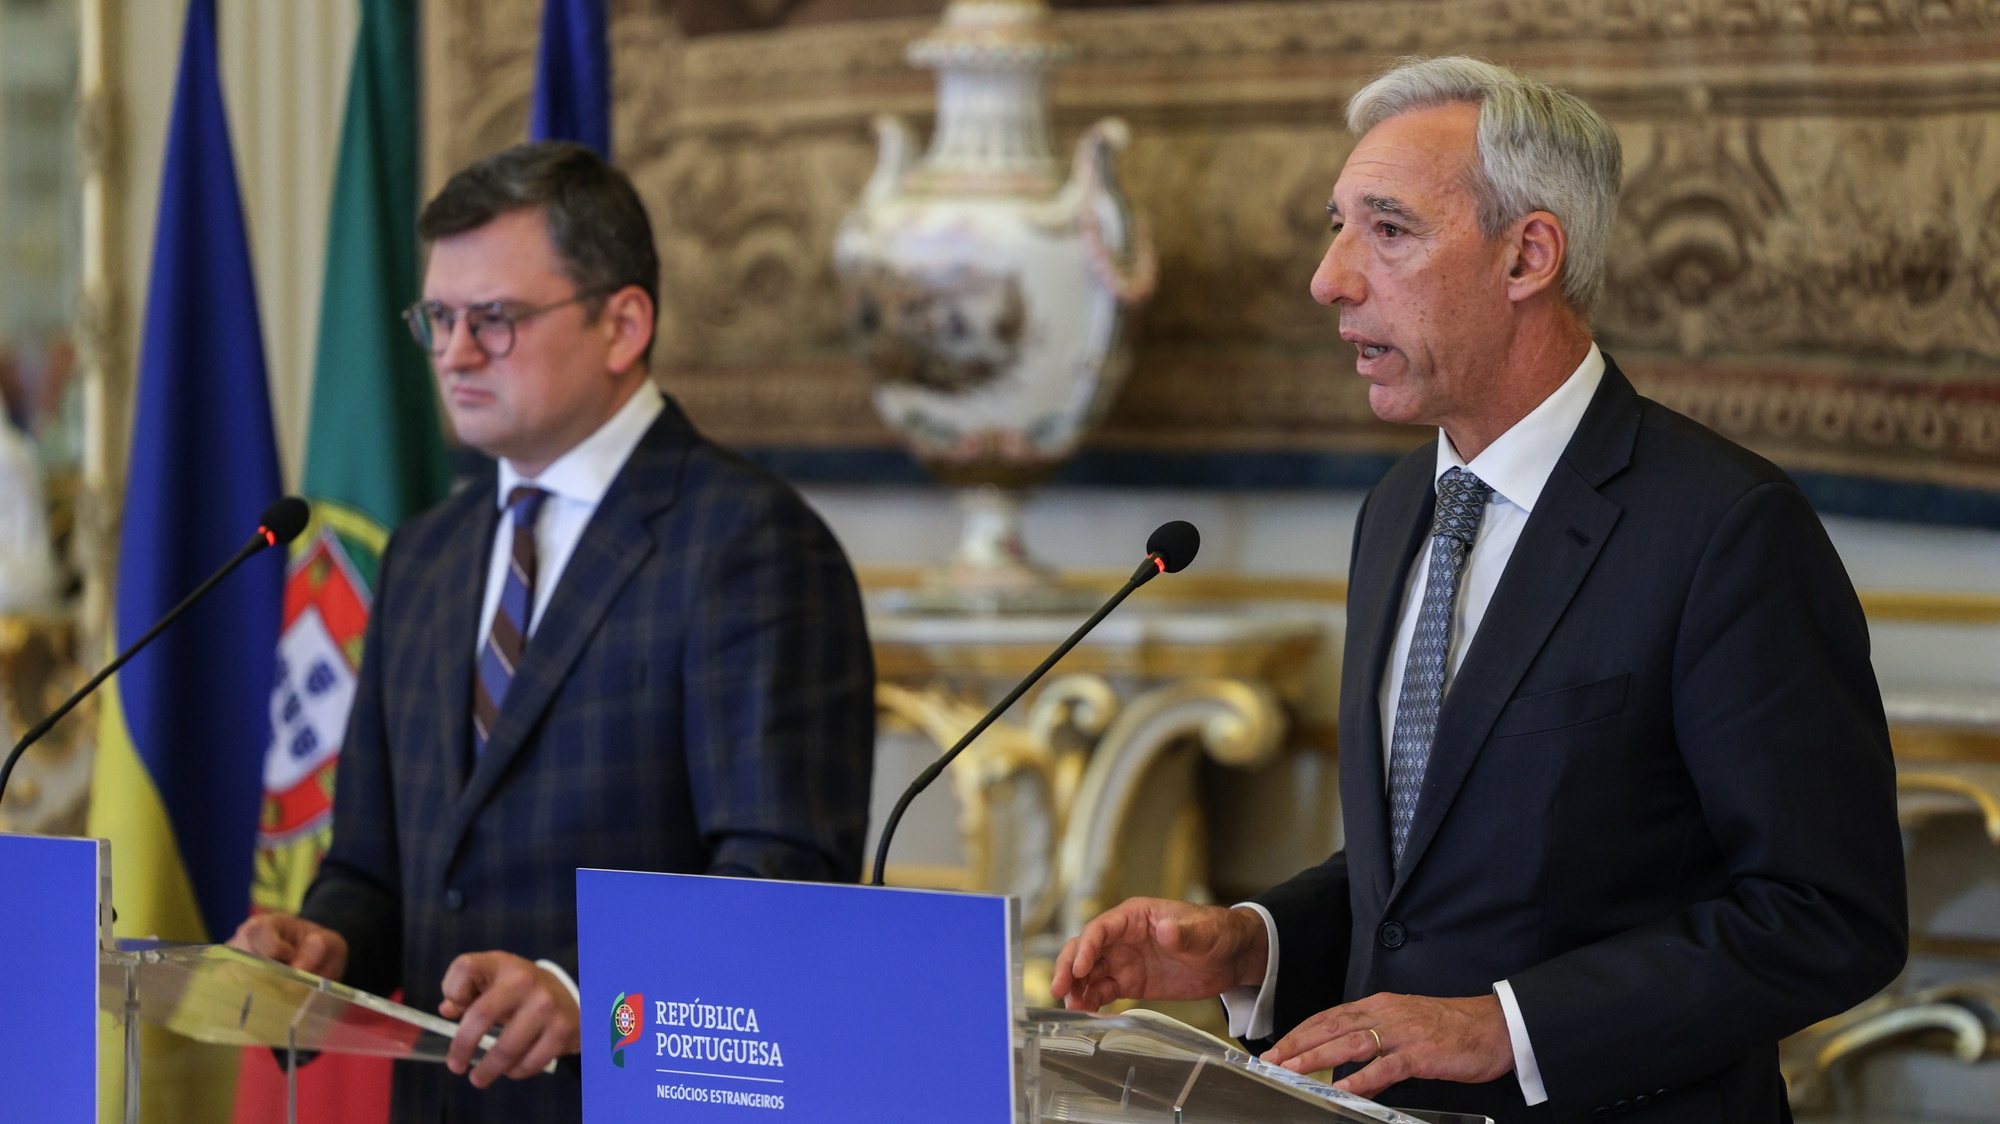 Minister of Foreign Affairs of Portugal Joao Gomes Cravinho (R) accompanied by his counterpart of Ukraine, Dmytro Kuleba (L) during a press conference after their meeting at Necessidades Palace in Lisbon, Portugal 19 May 2023. MIGUEL A. LOPES/LUSA